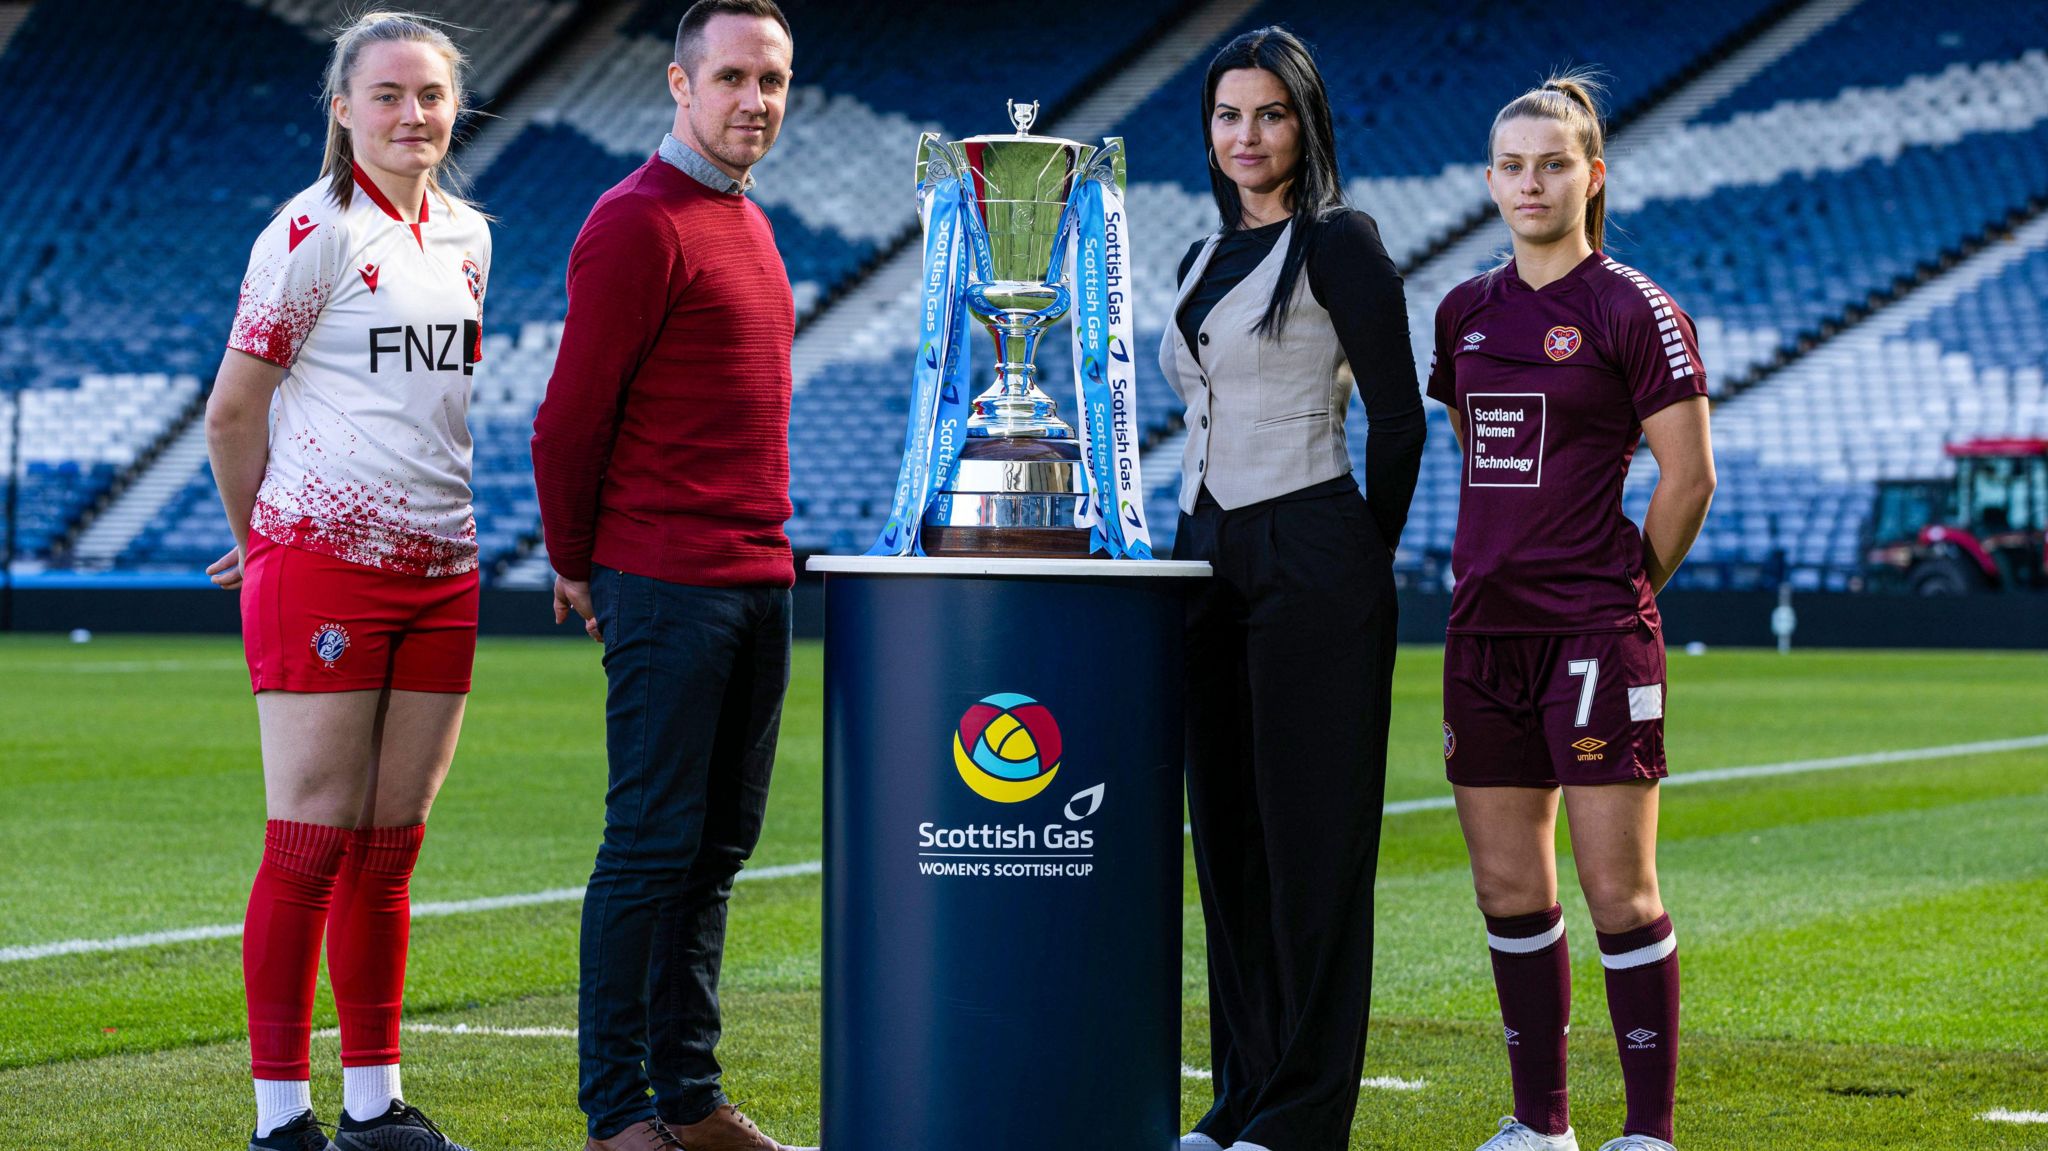 Robyn McCafferty, Jack Beesley, Eva Olid and Monica Forsyth with the women's Scottish Cup trophy